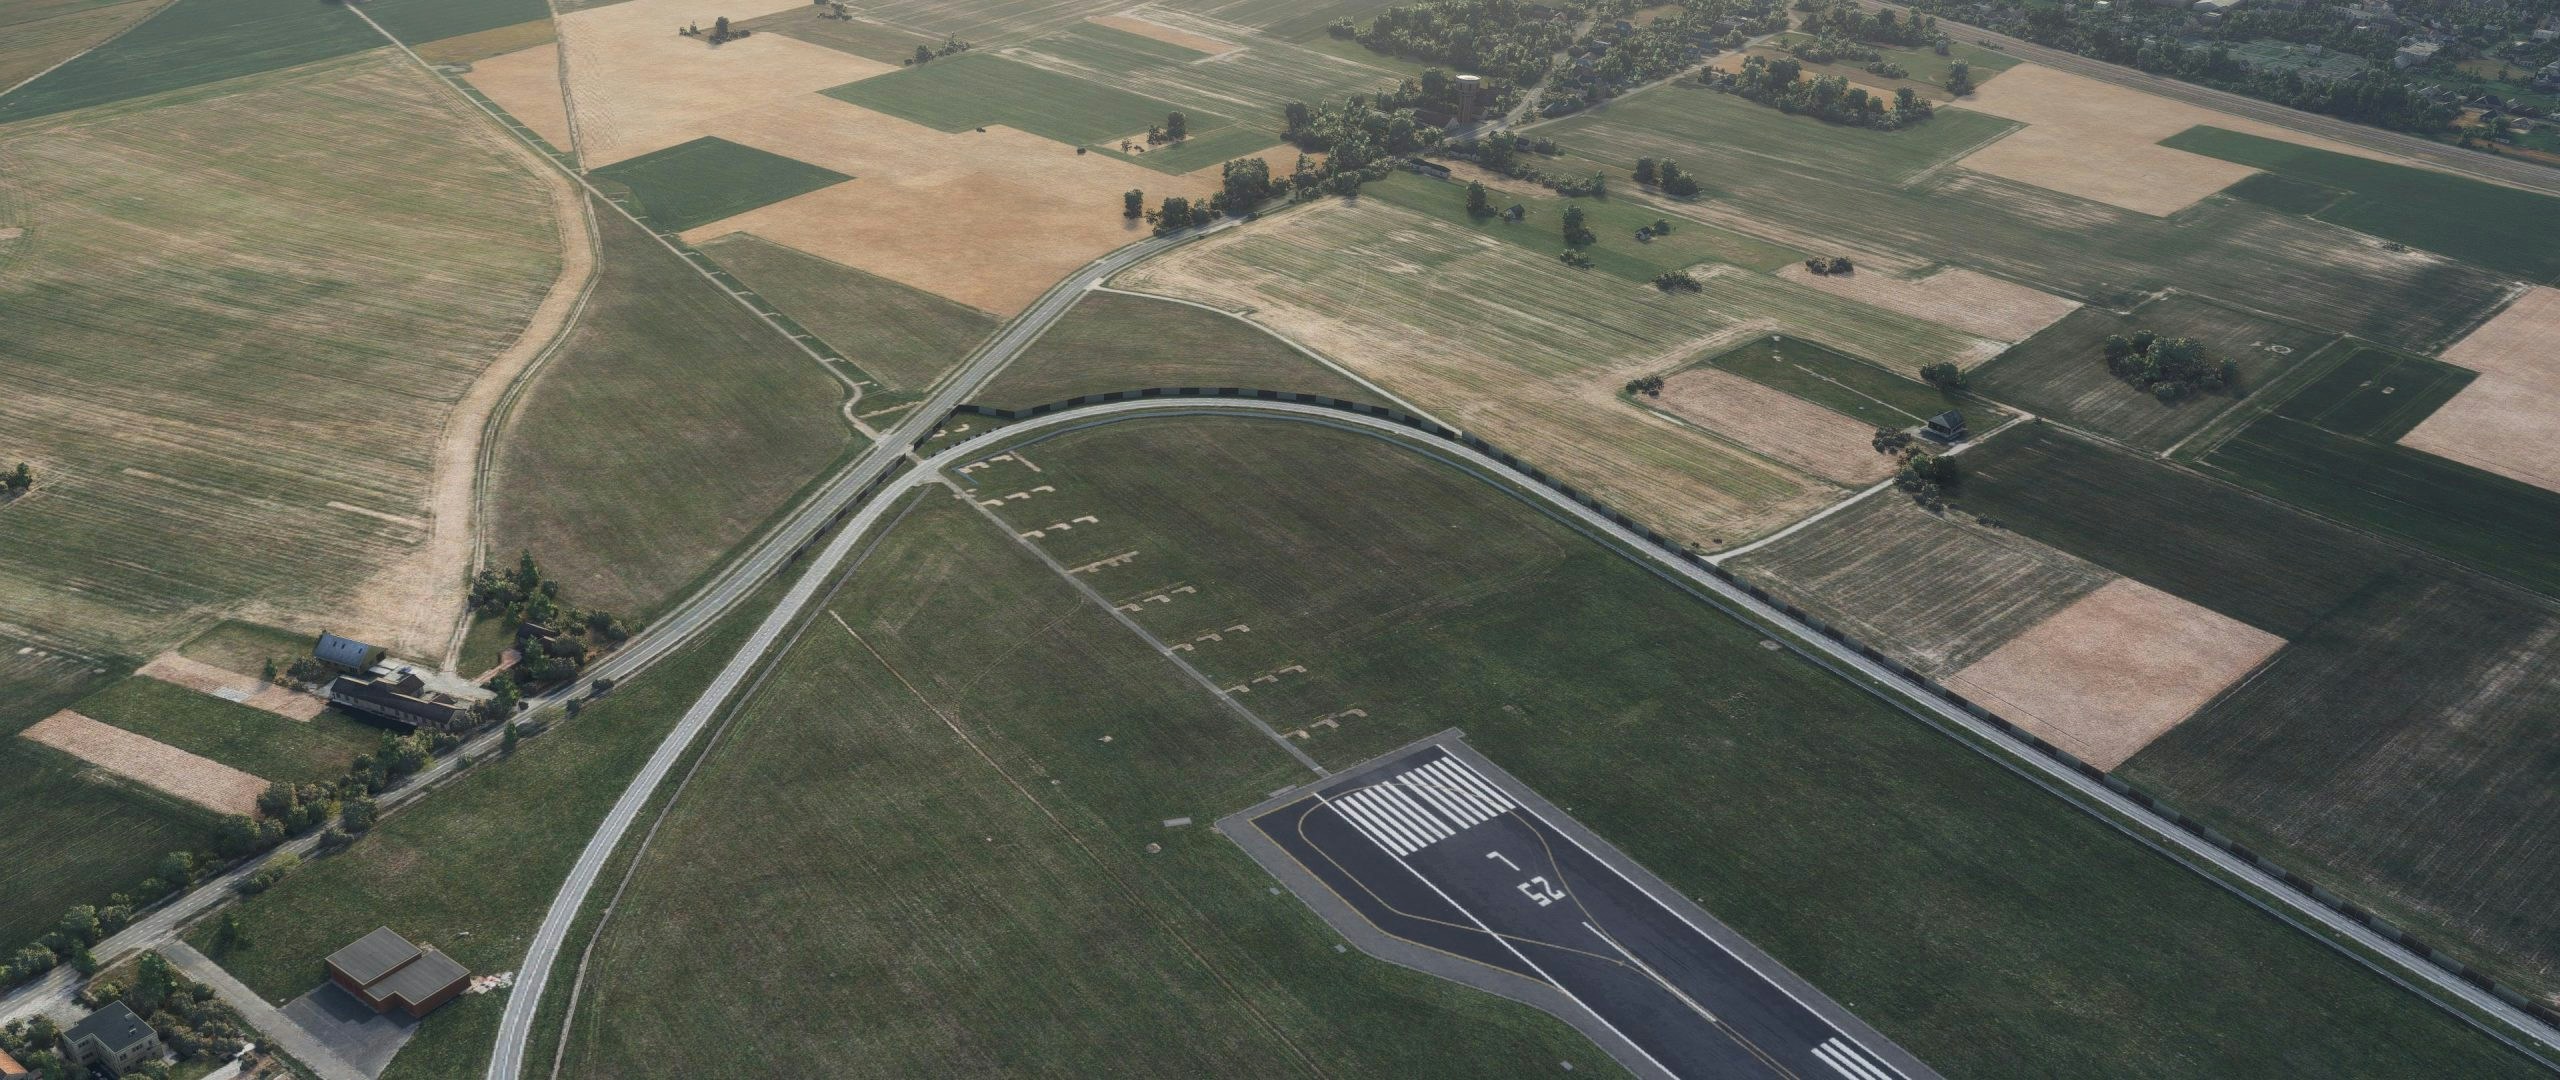 Aerosoft Airport Brussels Releasing on April 20th